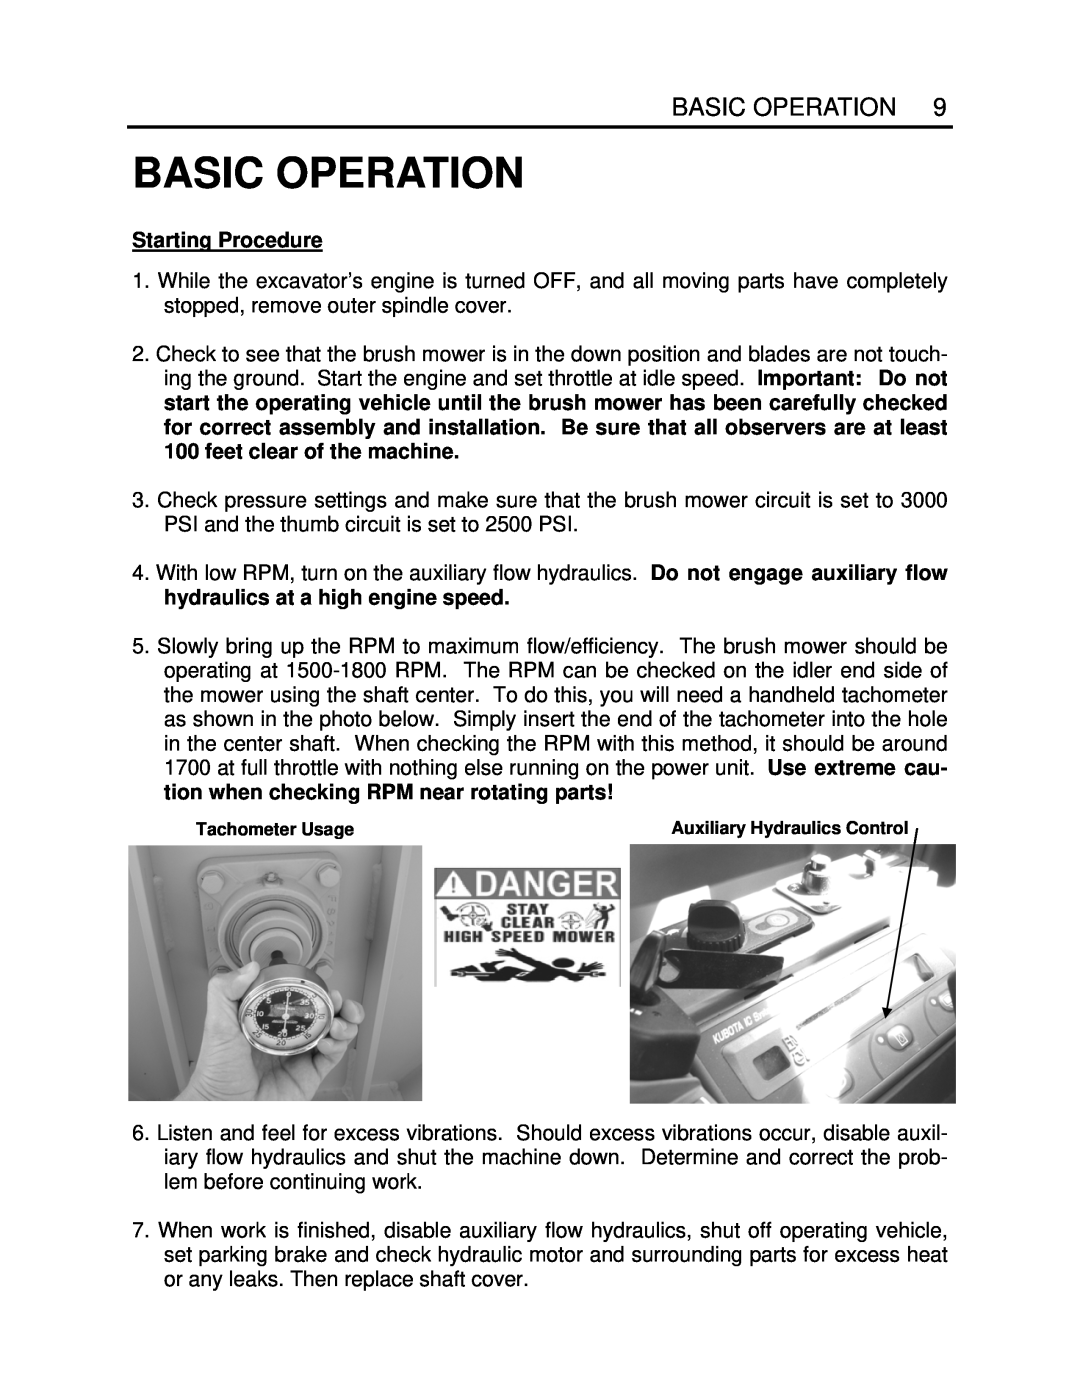 Generac Power Systems K4080 manual Basic Operation, Starting Procedure, Tachometer Usage, Auxiliary Hydraulics Control 